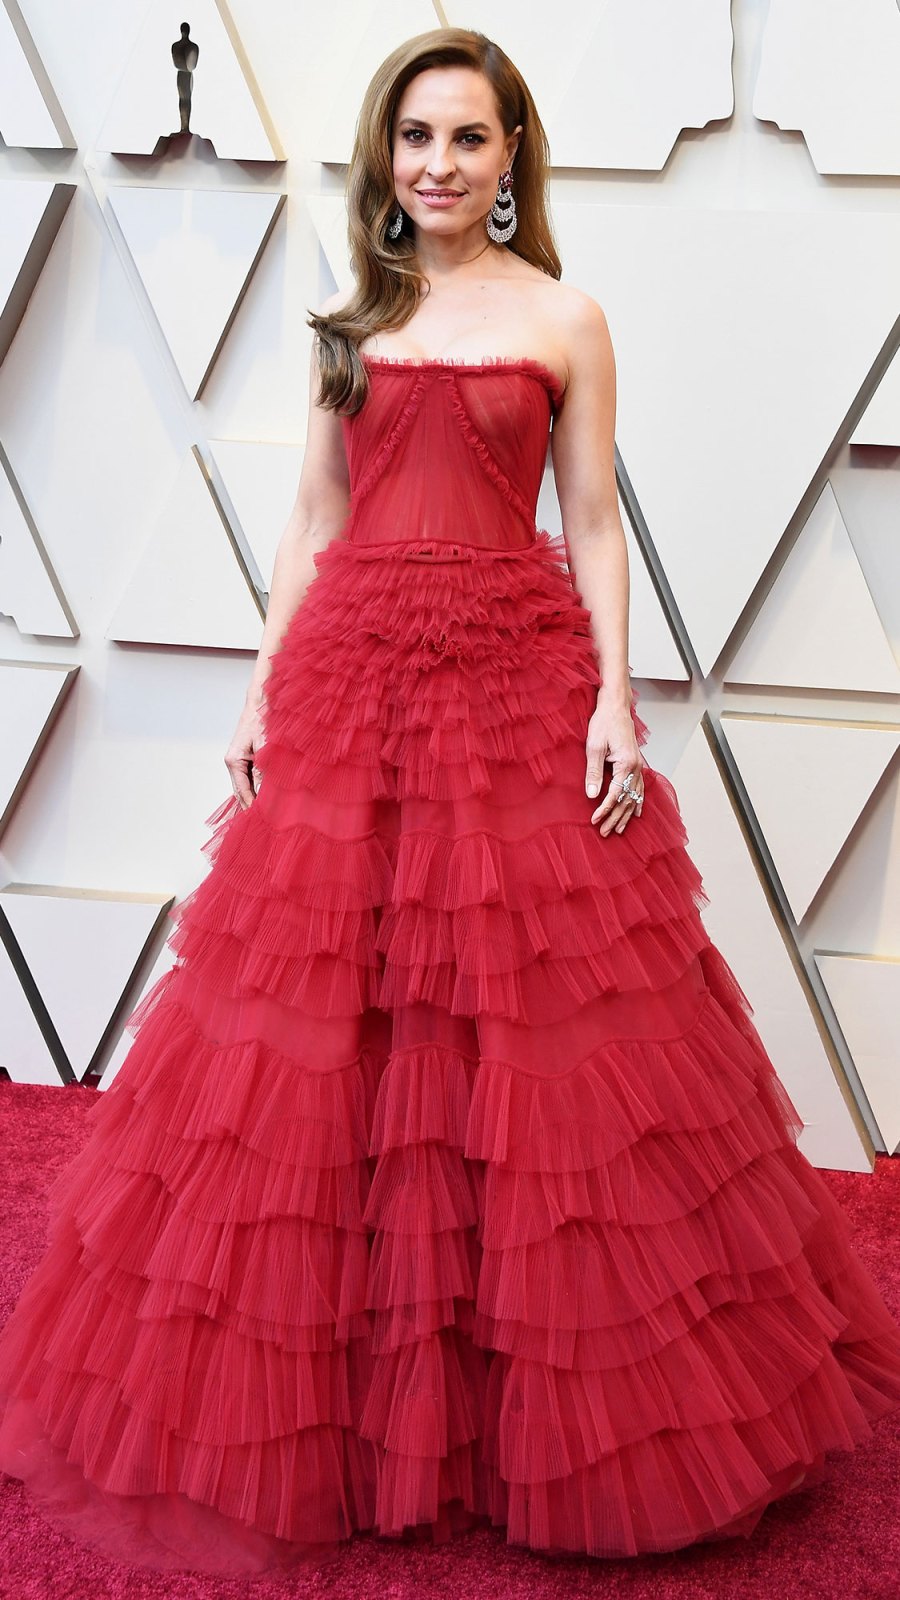 Oscars 2019 Red Carpet Fashion: See Celeb Dresses, Gowns